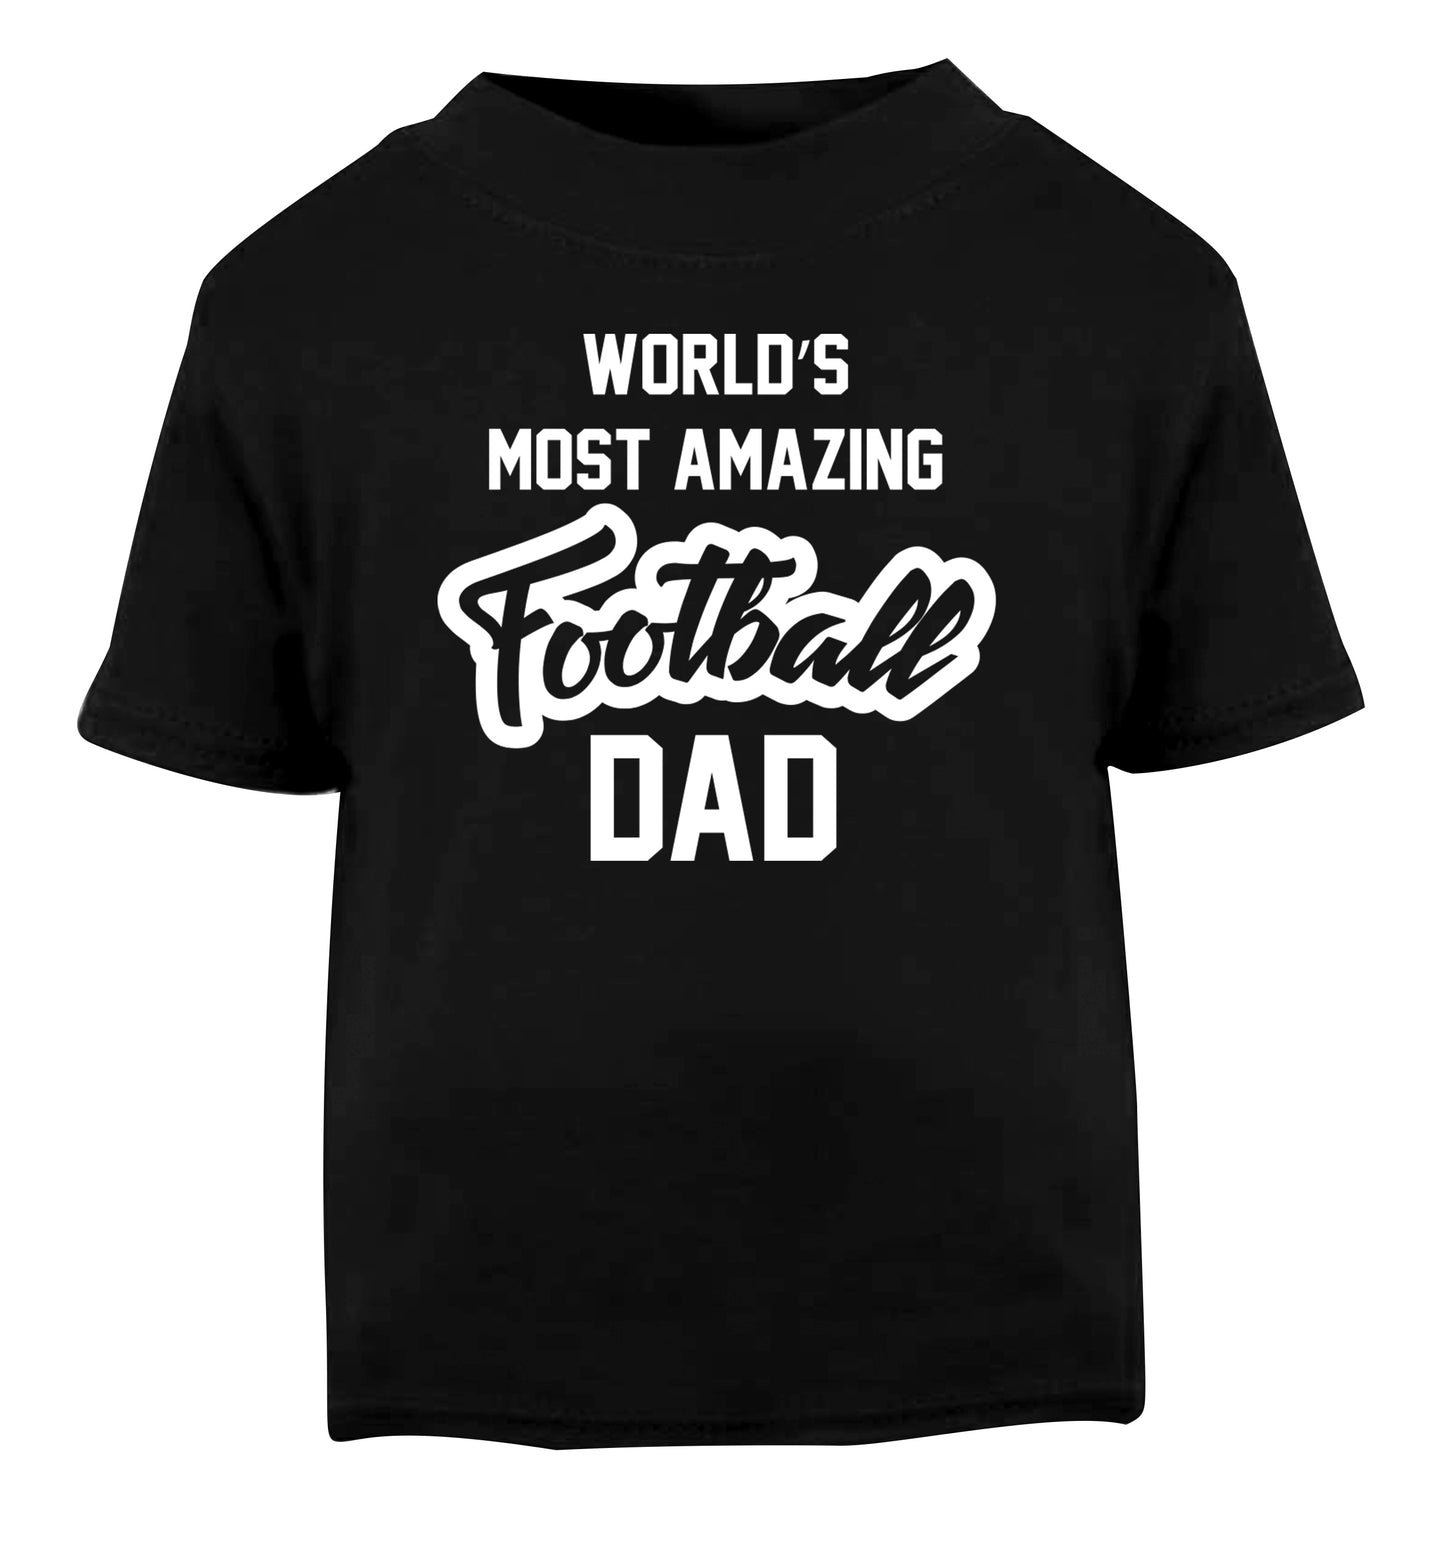 Worlds most amazing football dad Black Baby Toddler Tshirt 2 years